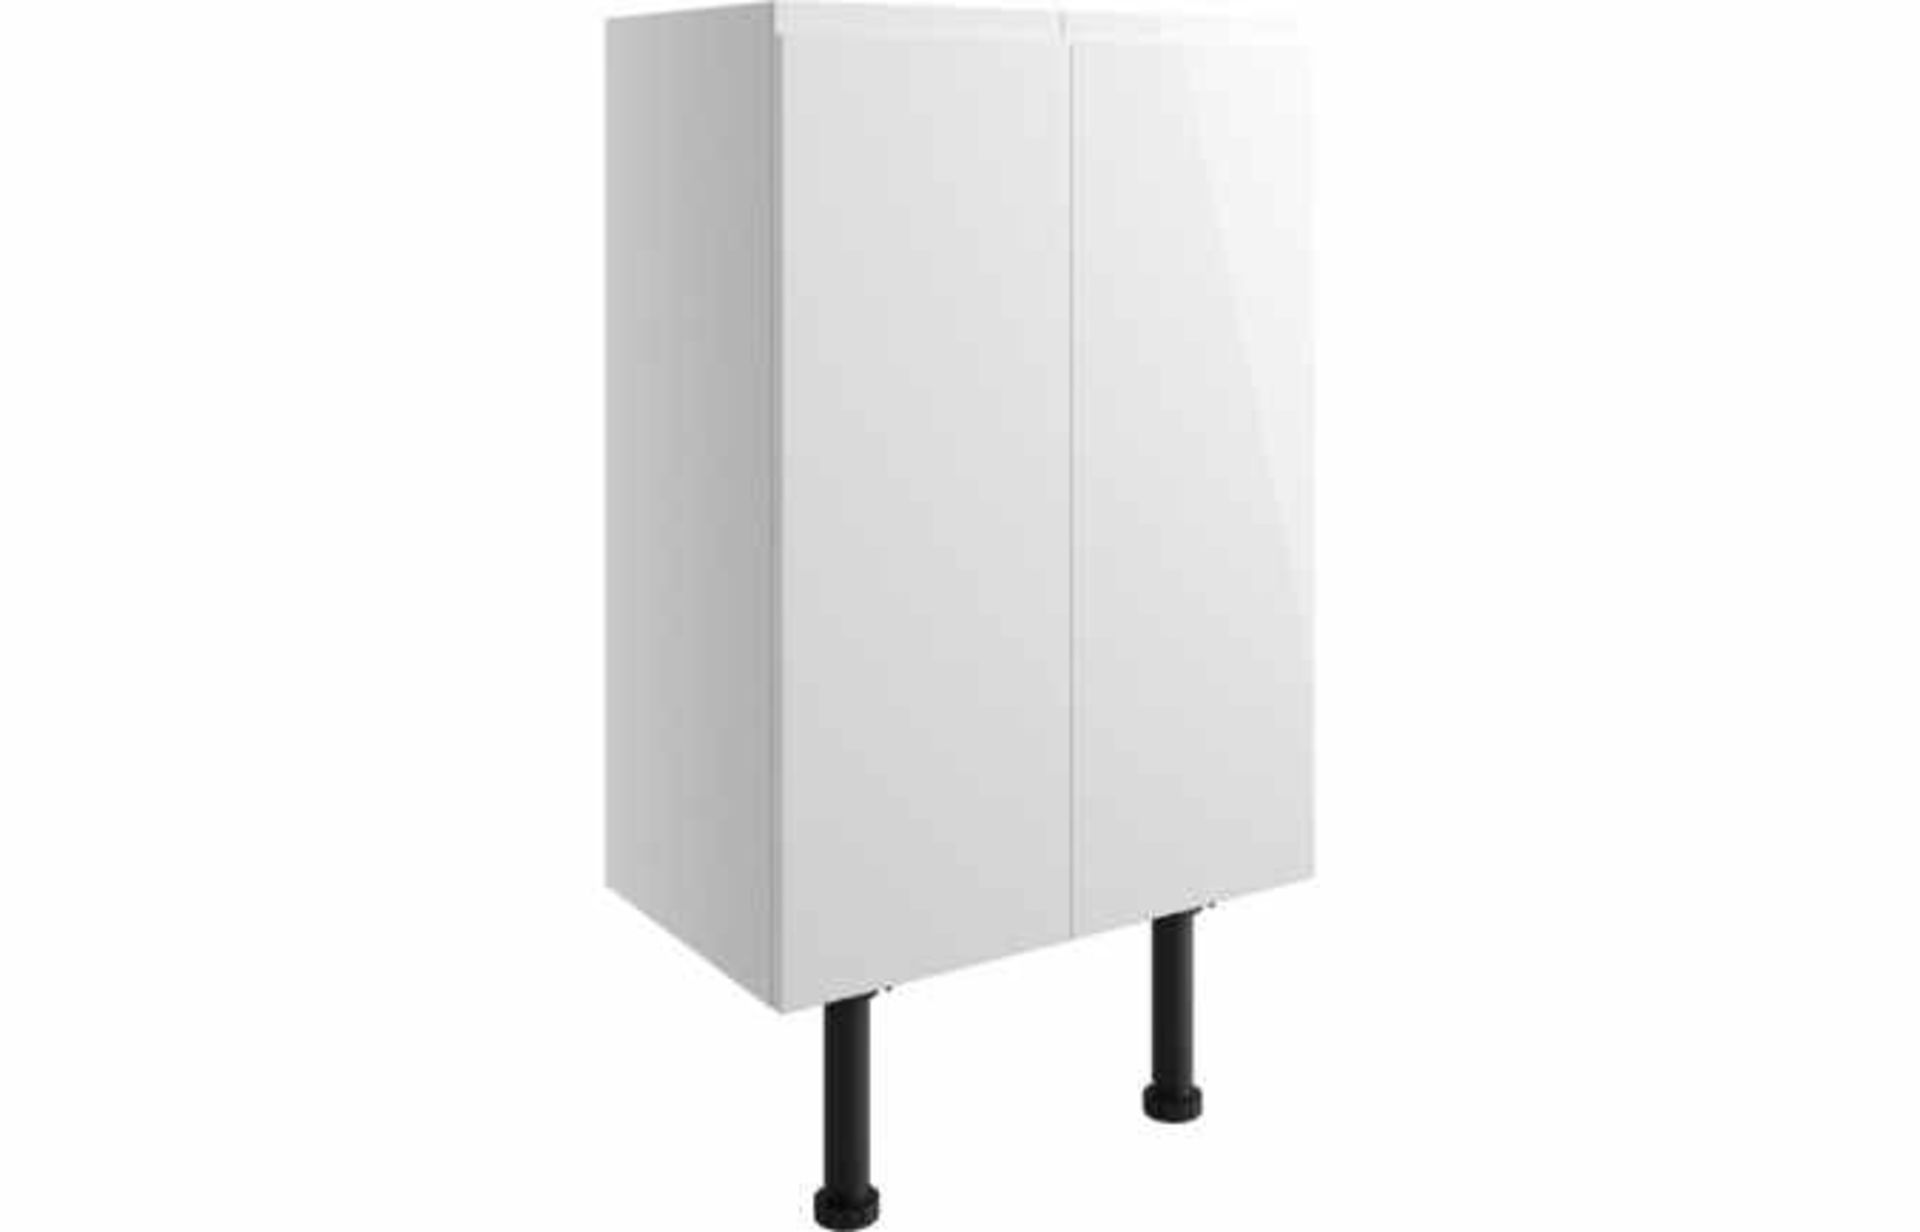 New (Y108) 600mm - Valesso 2 Door Base Unit - White Gloss. Durable 18mm Cabinet, Sides And Back... - Image 2 of 2